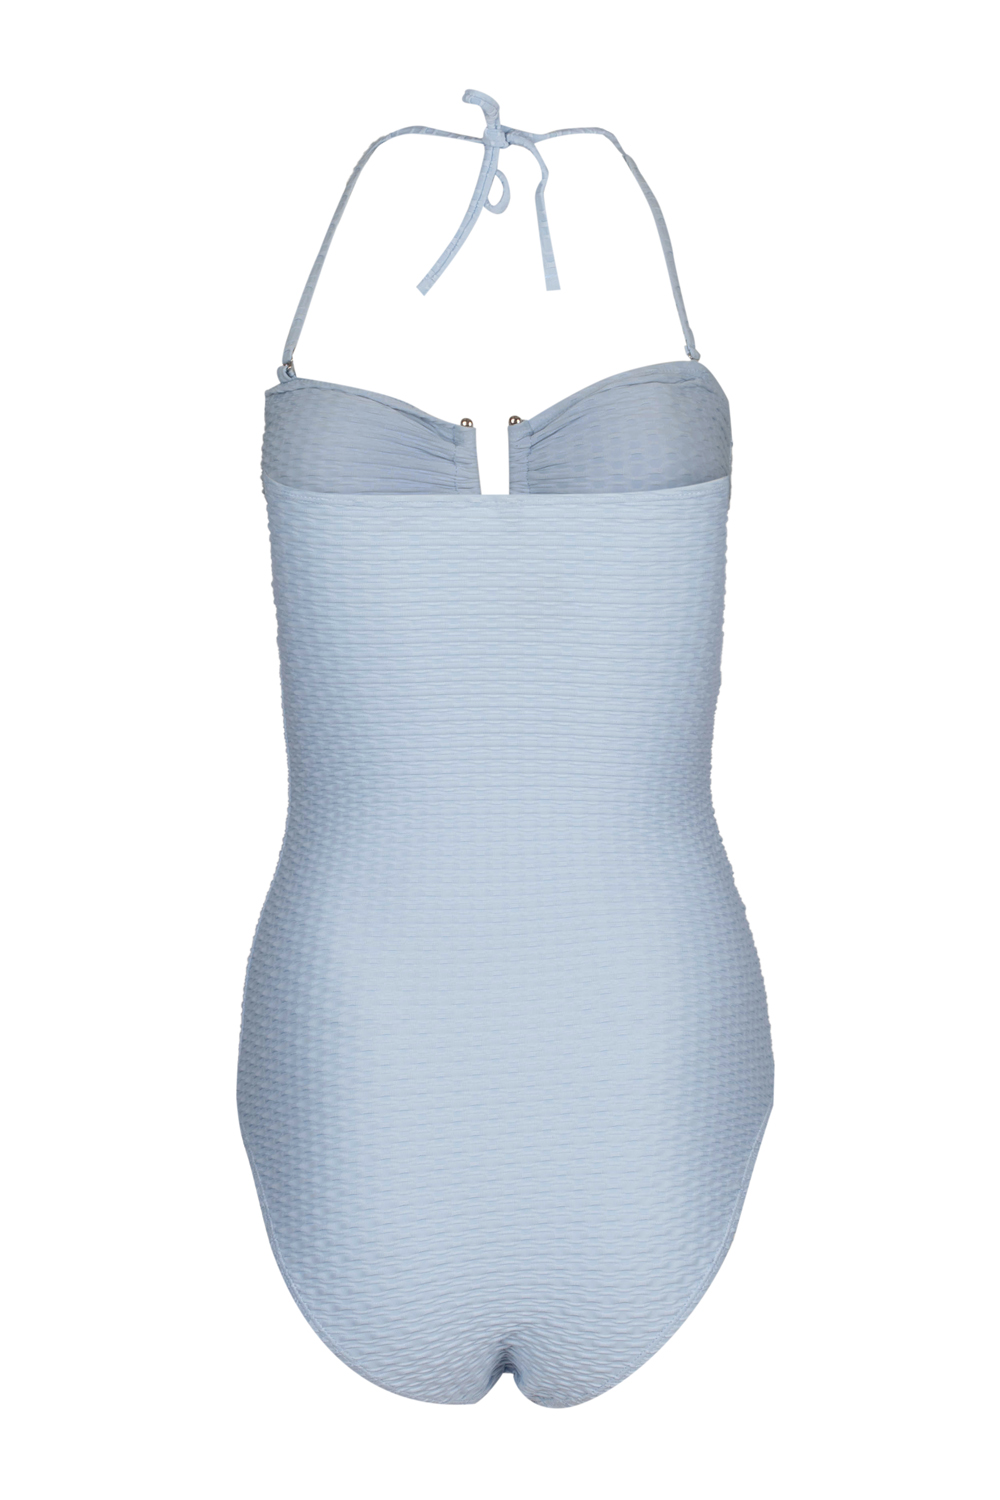 Textured Strapless Swimming Suit ( with Extra Straps )